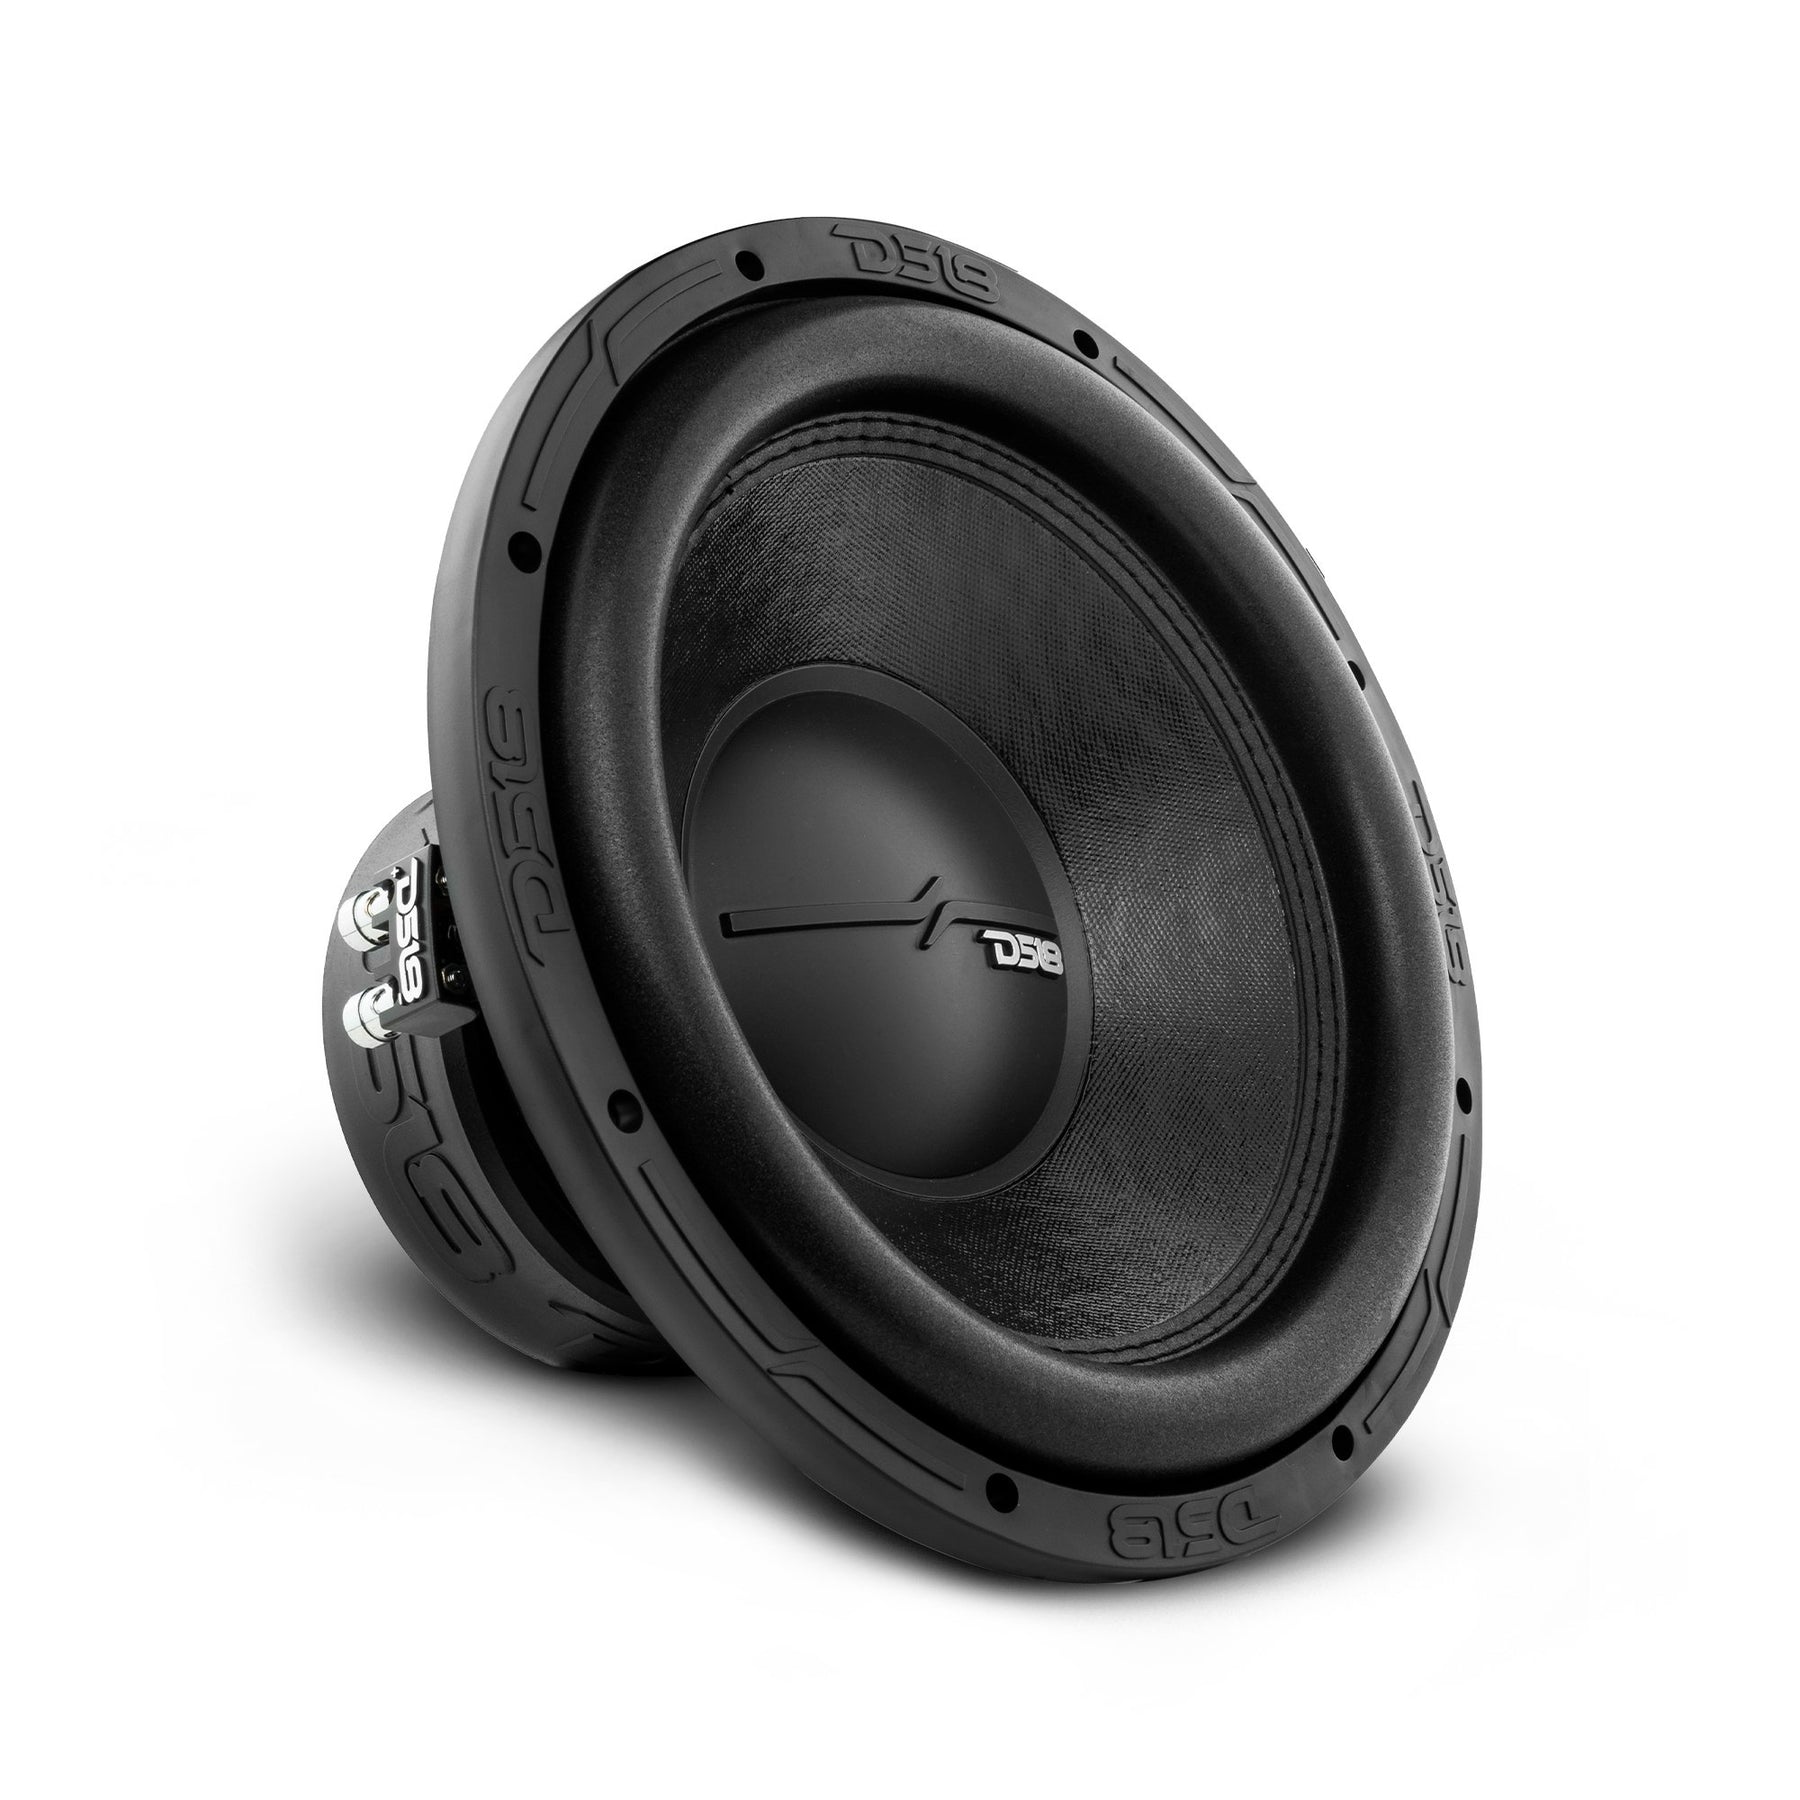 DS18 ELITE-Z 12" Subwoofer with 1600 Watts DVC 4-Ohms audio subwoofers